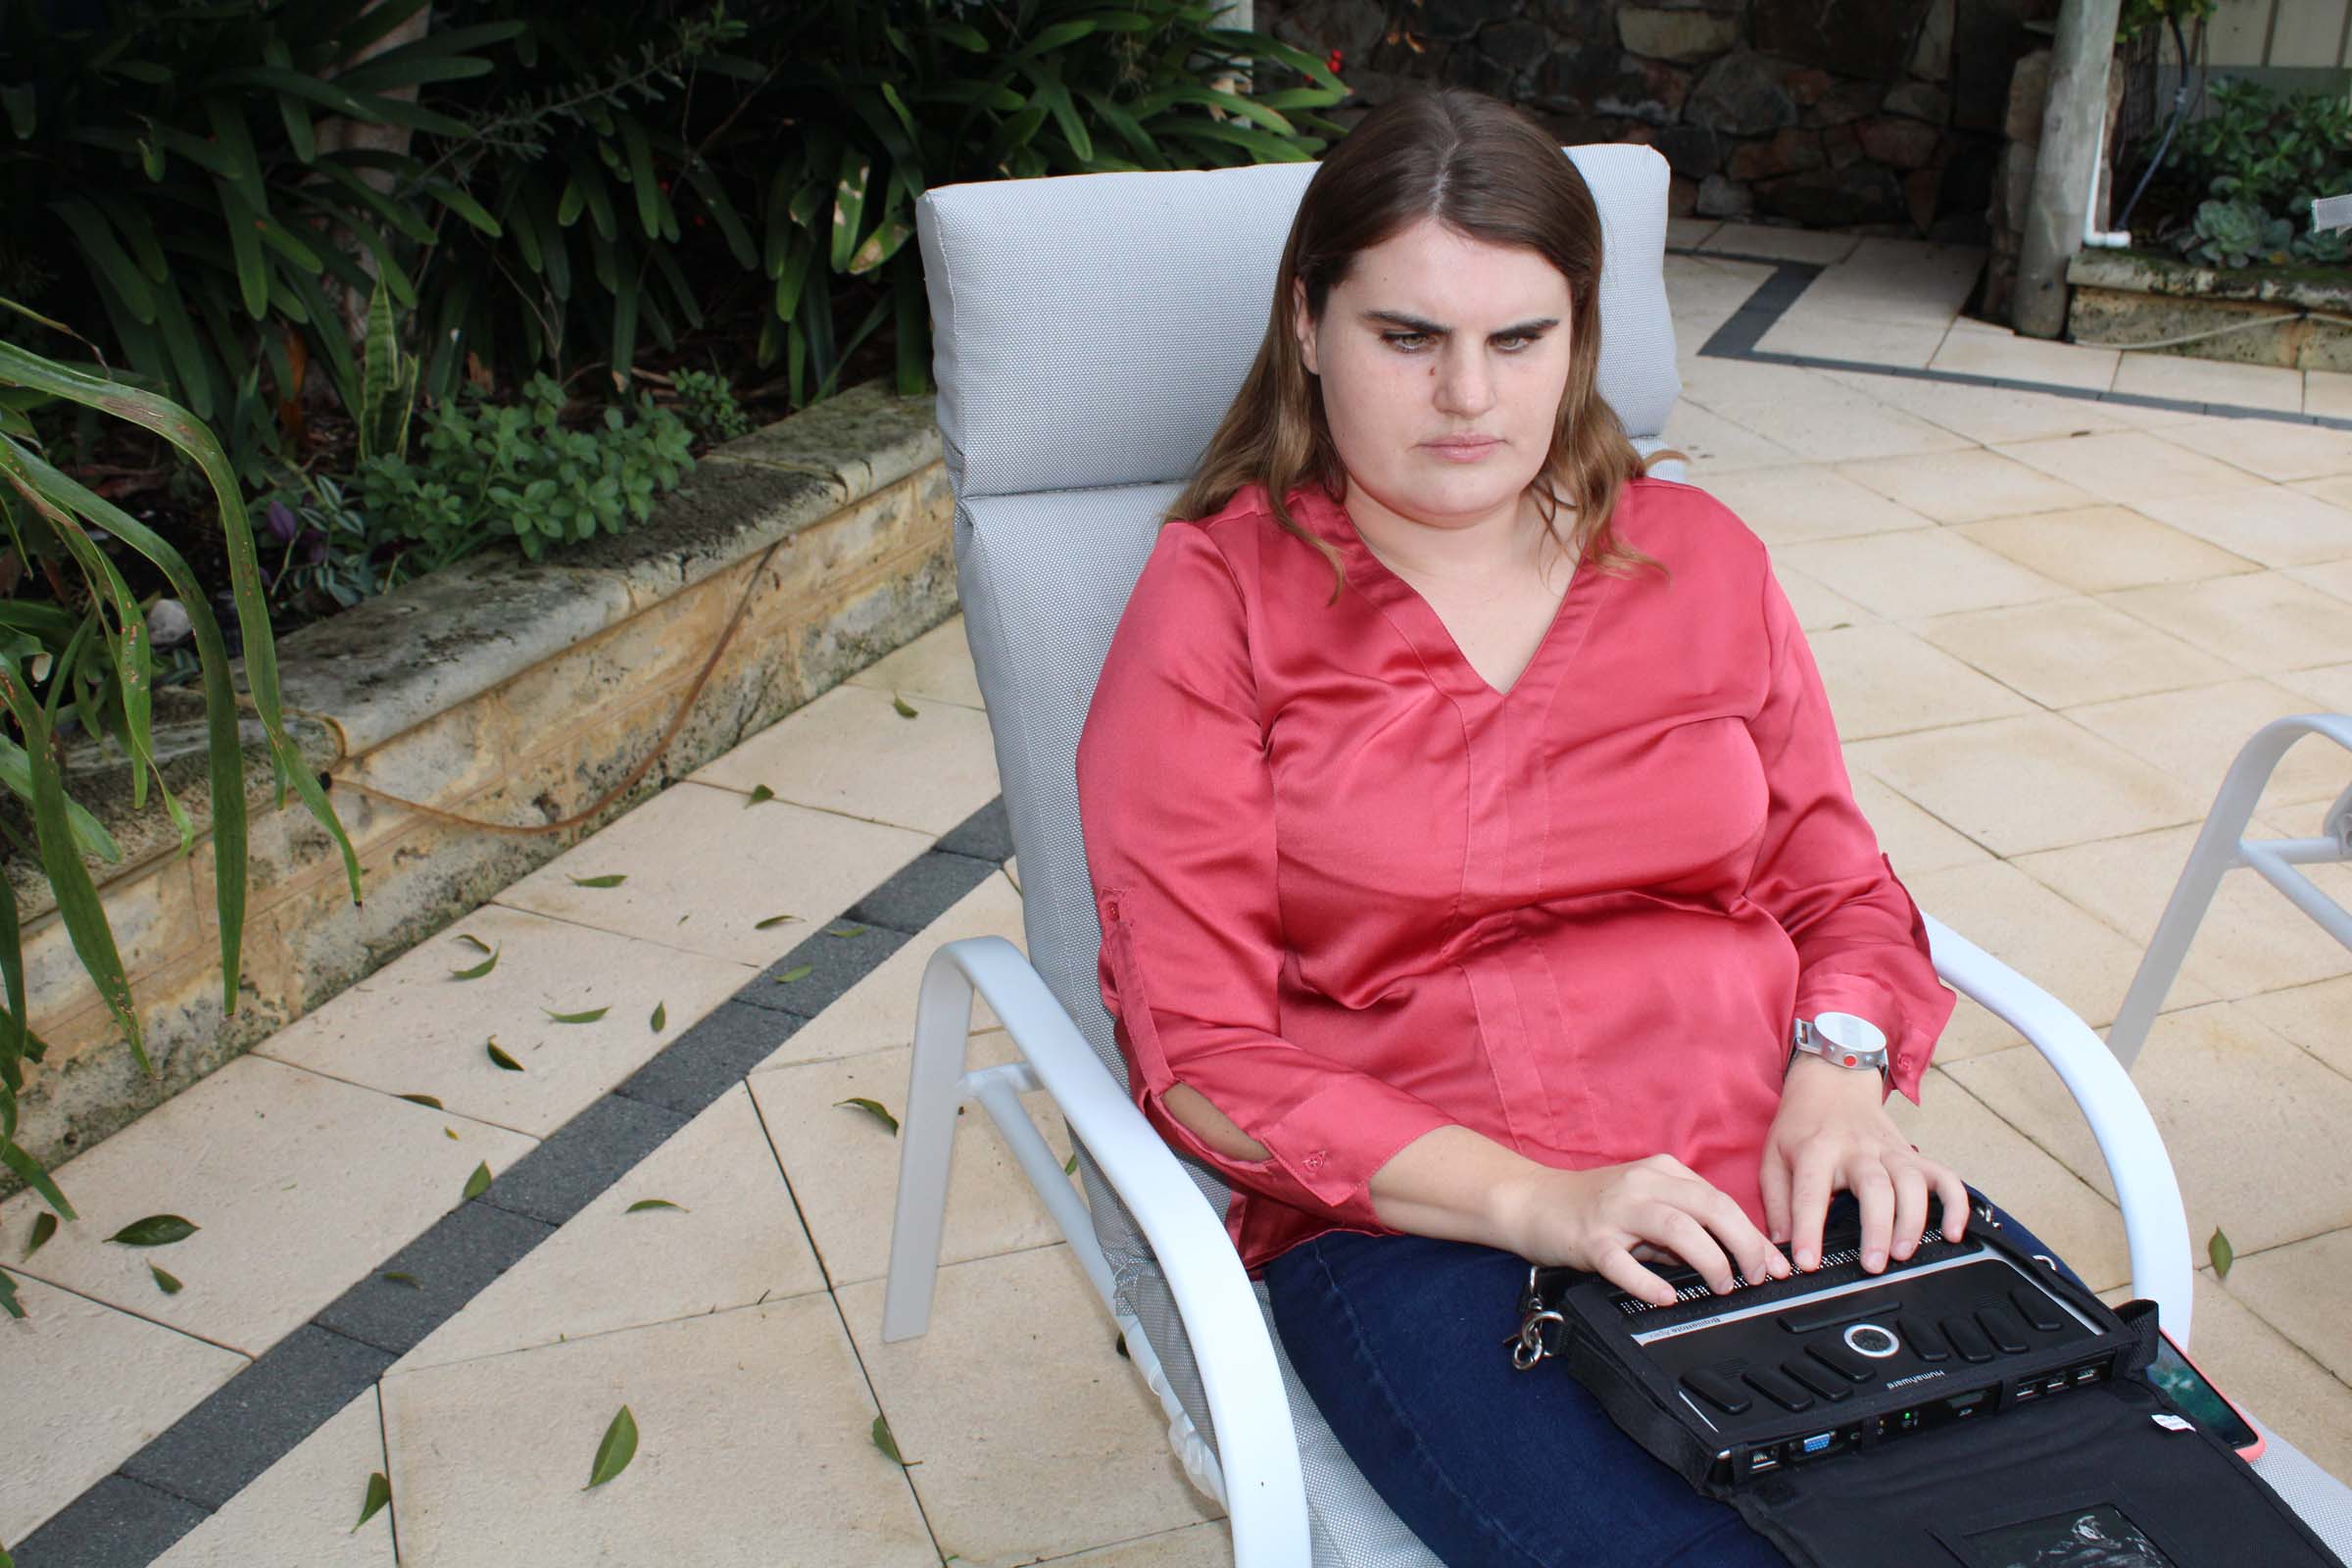 A woman sits on a deckchair and types on her Braille note device.